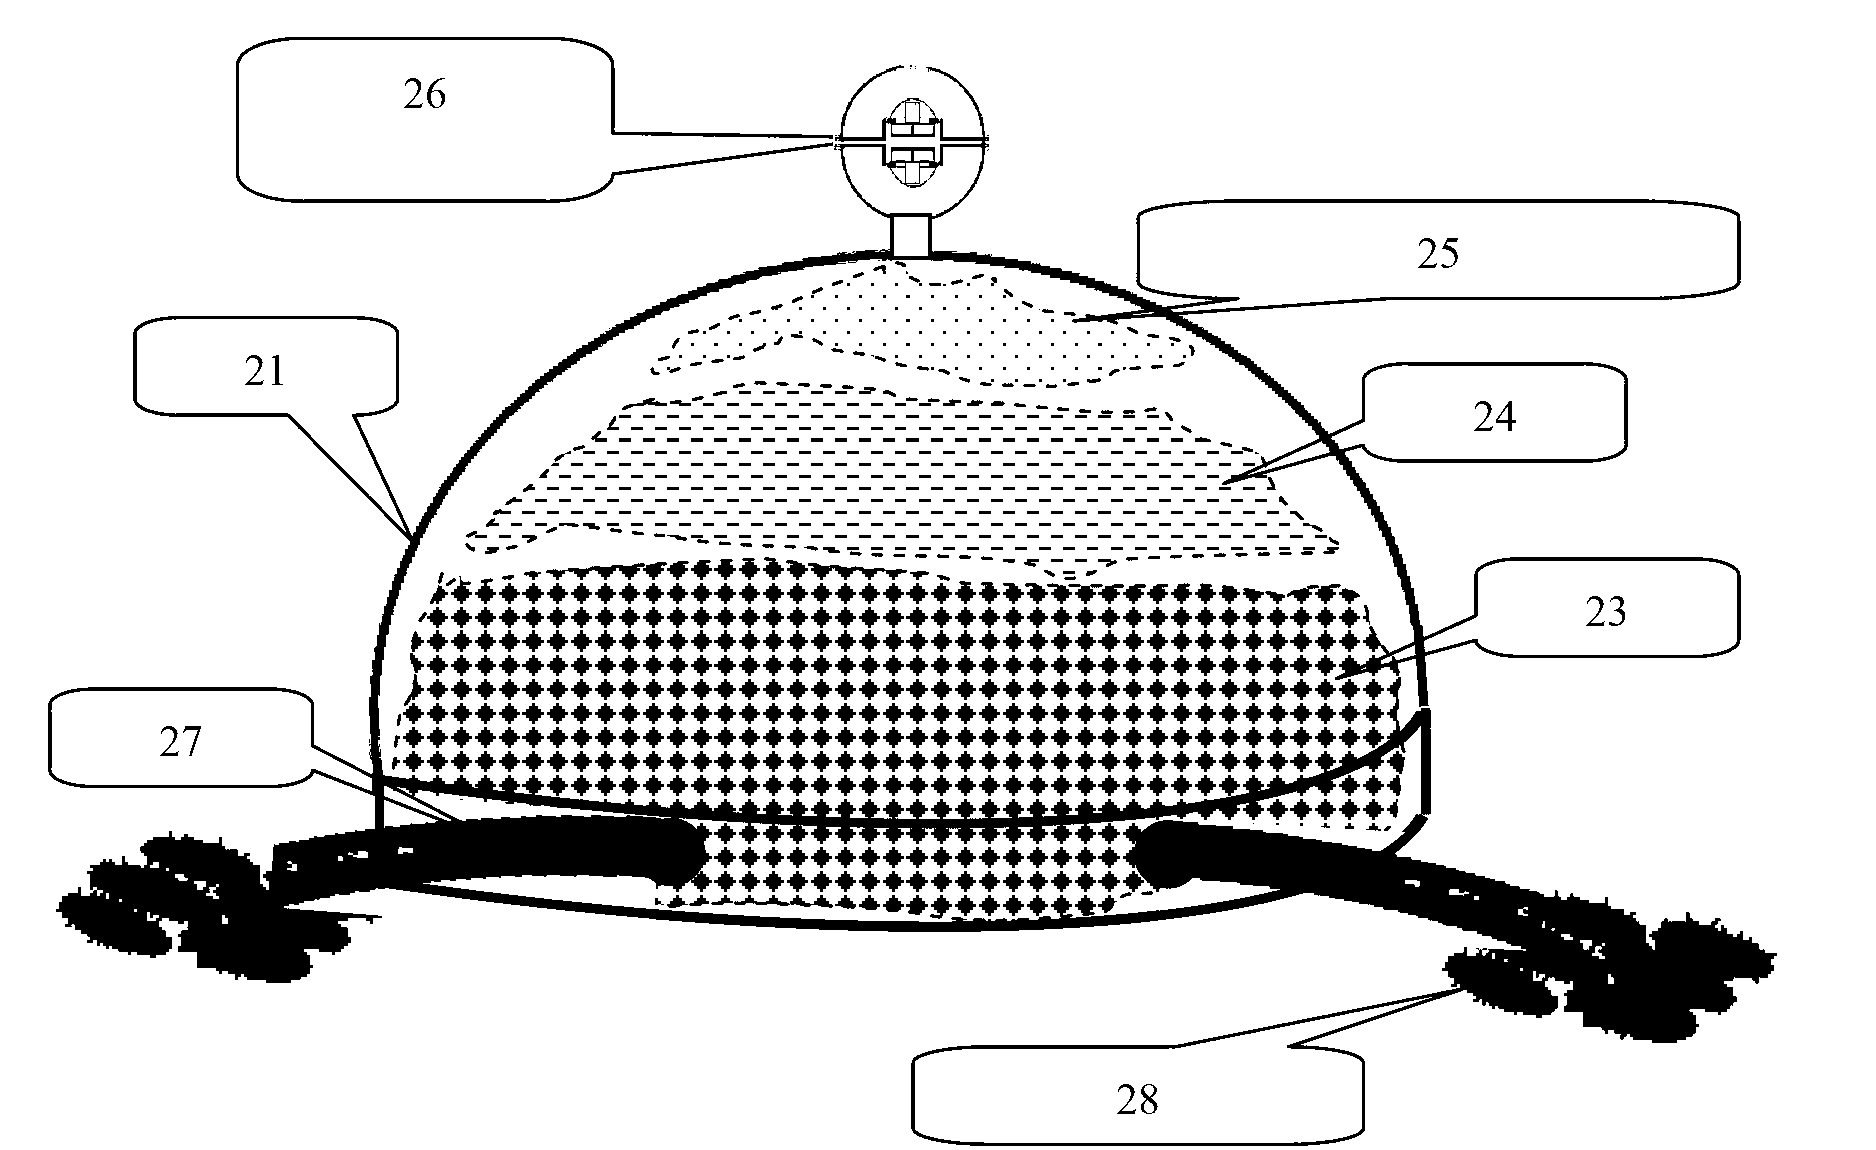 Identification and space positioning device and method for fished targets based on omni directional vision